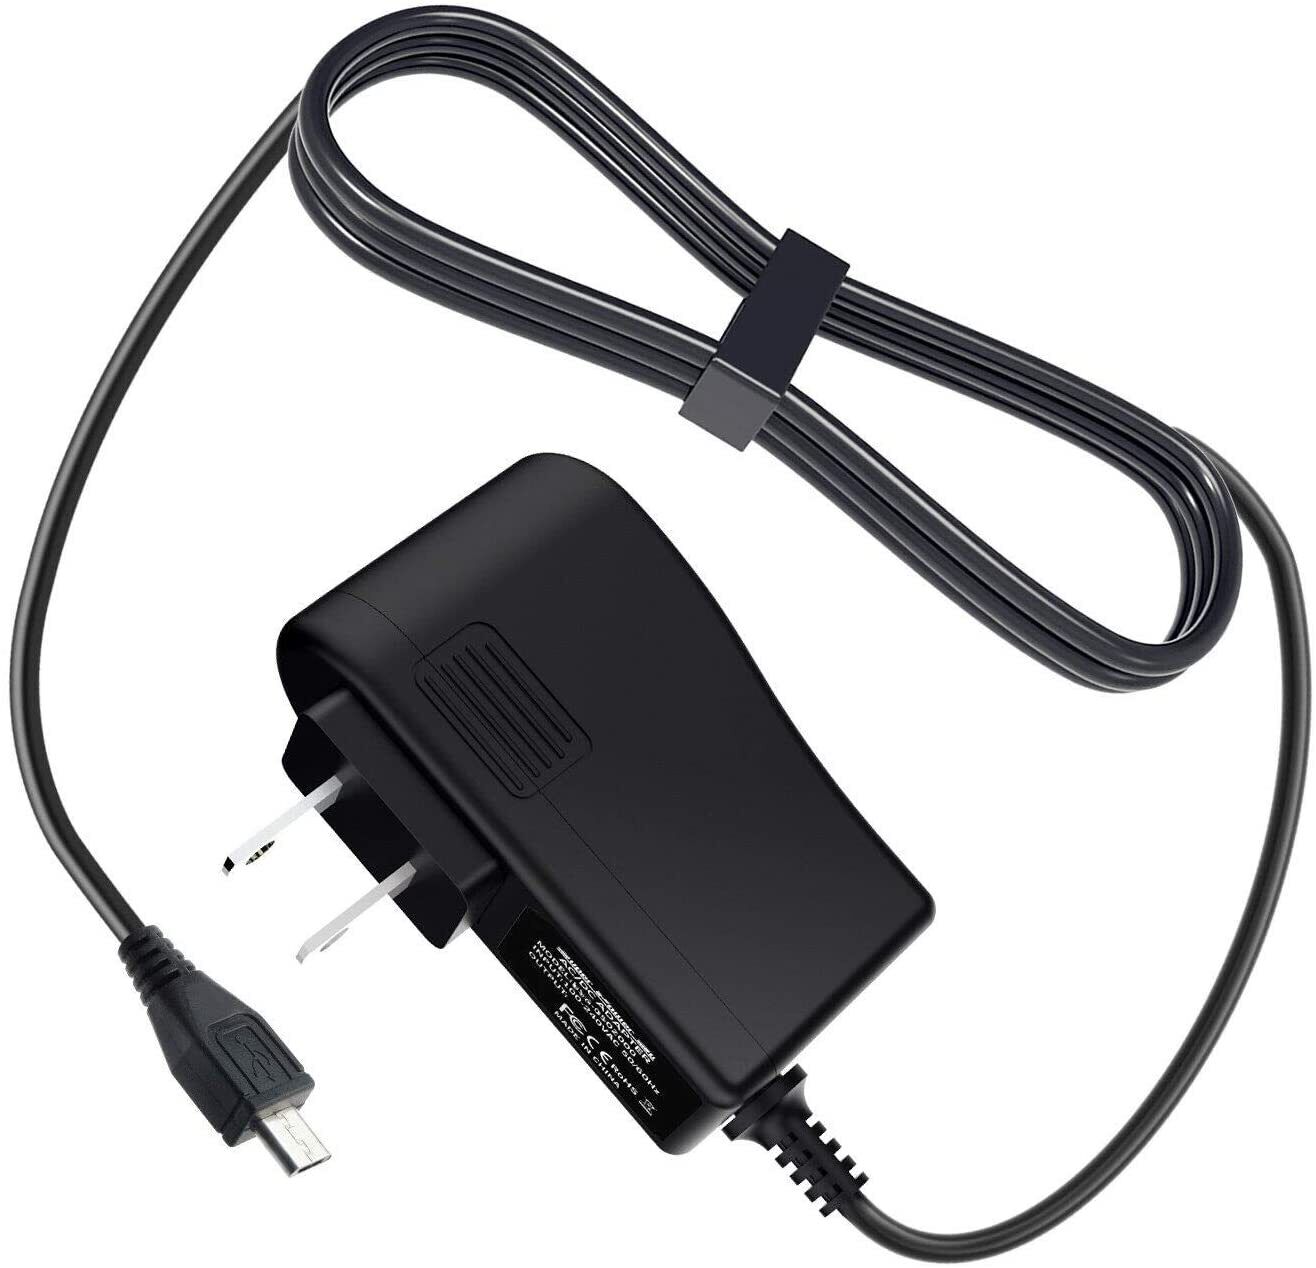 *Brand NEW*for DOSS Soundbox Touch Color XS Speaker AC DC Adapter Power Charger Cord Cable